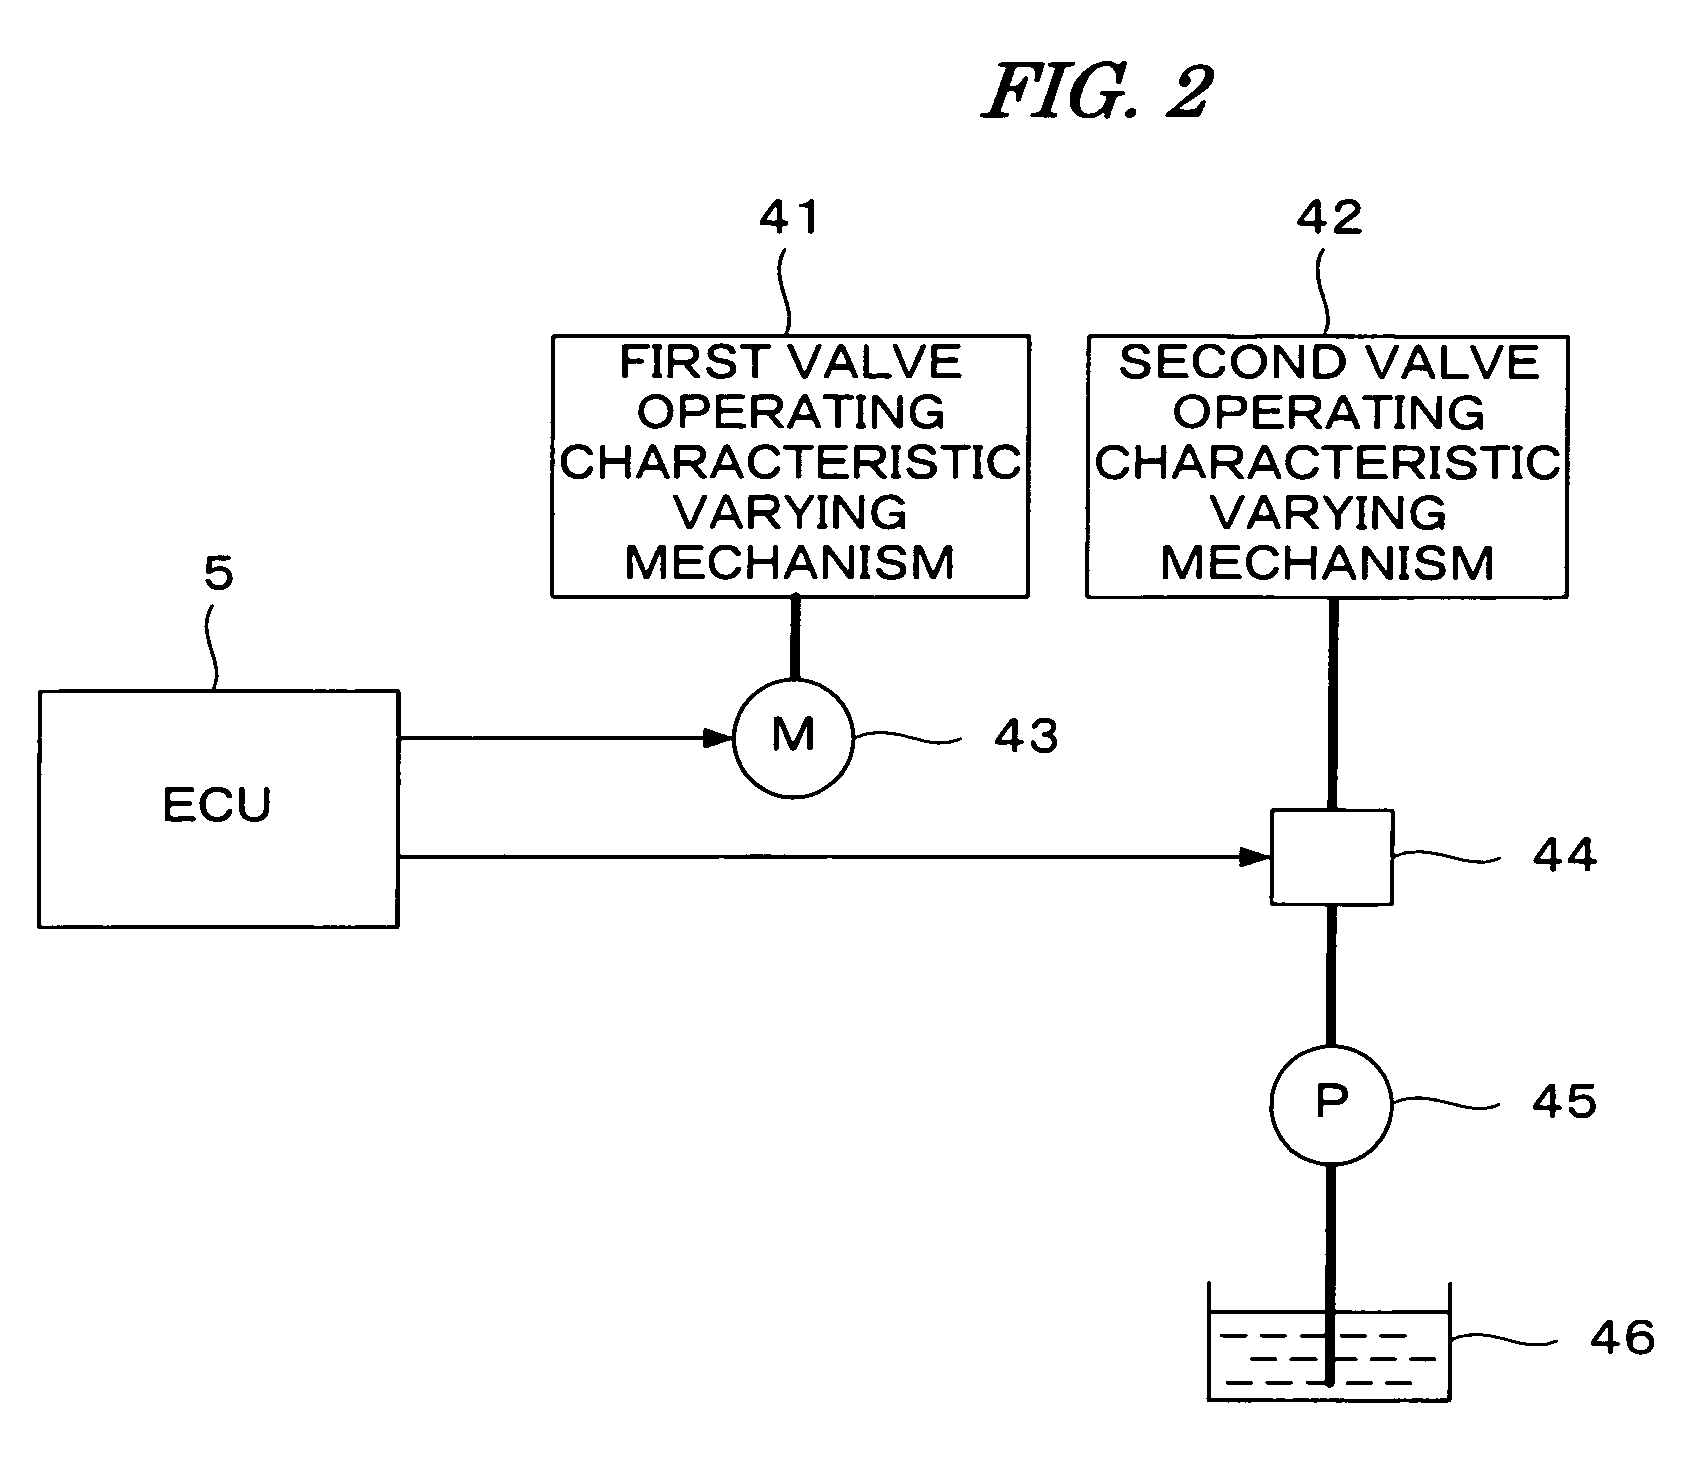 Intake air control system for internal combustion engine